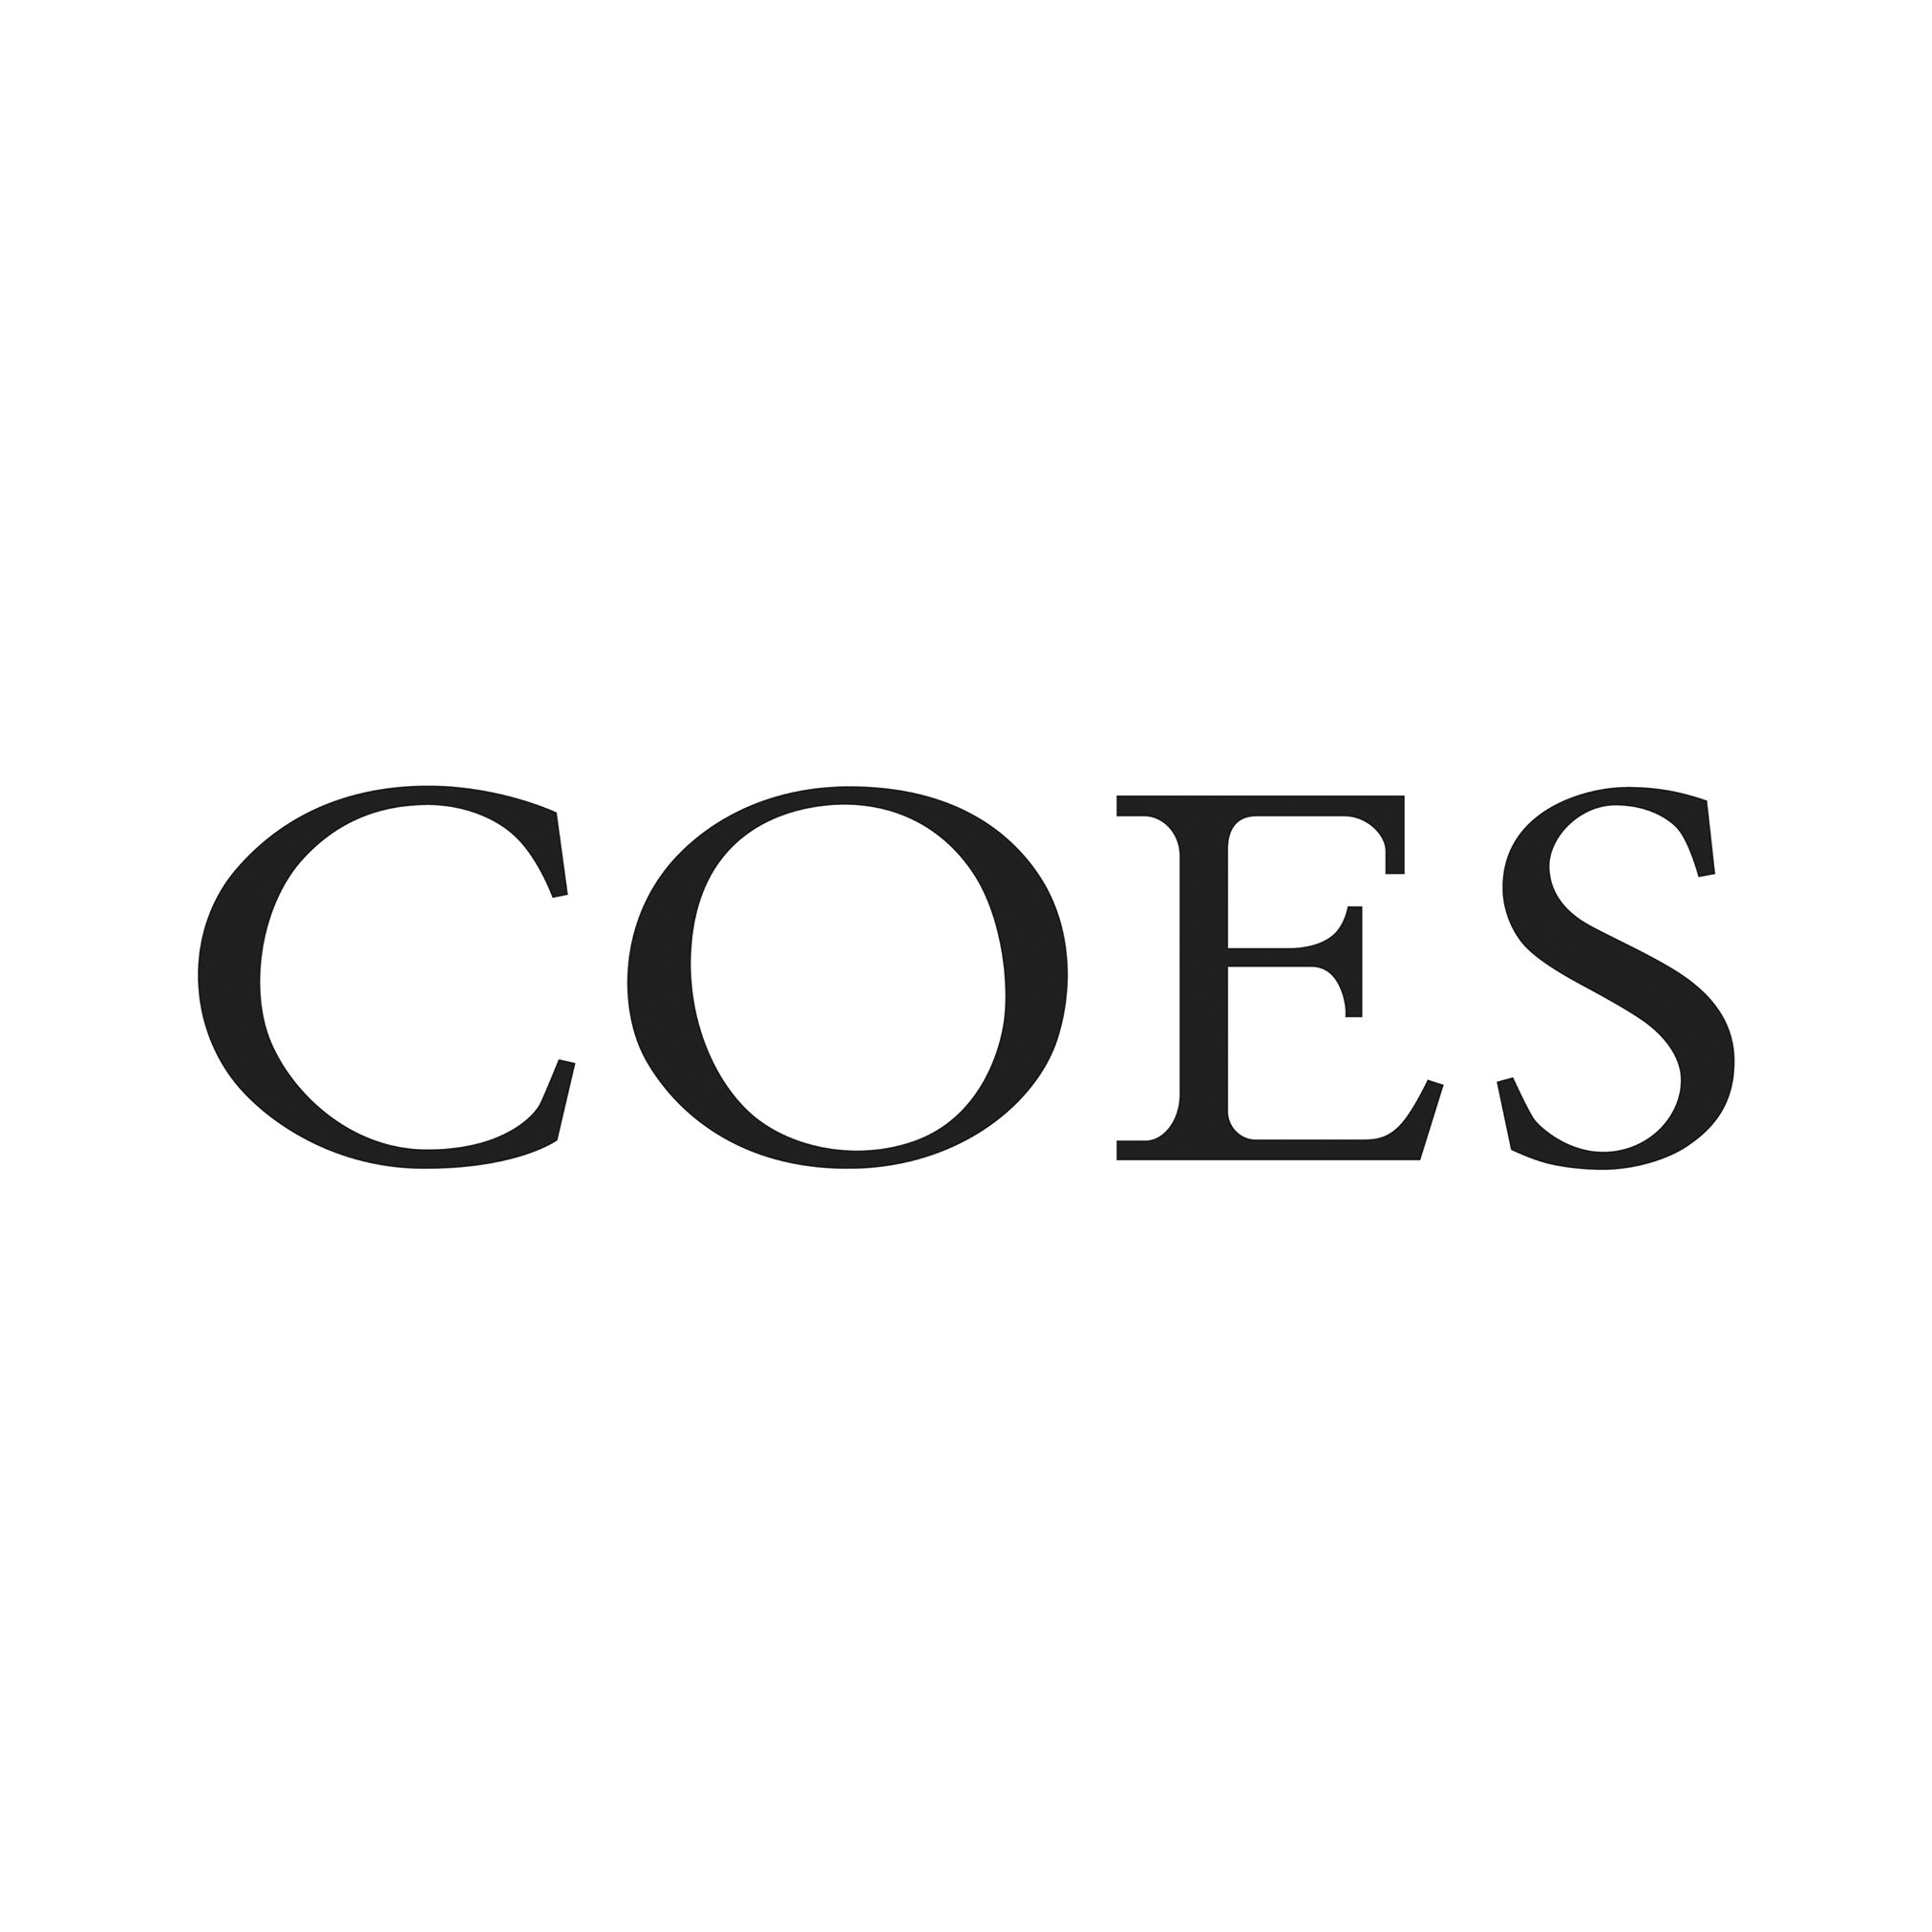 Coes Coupons